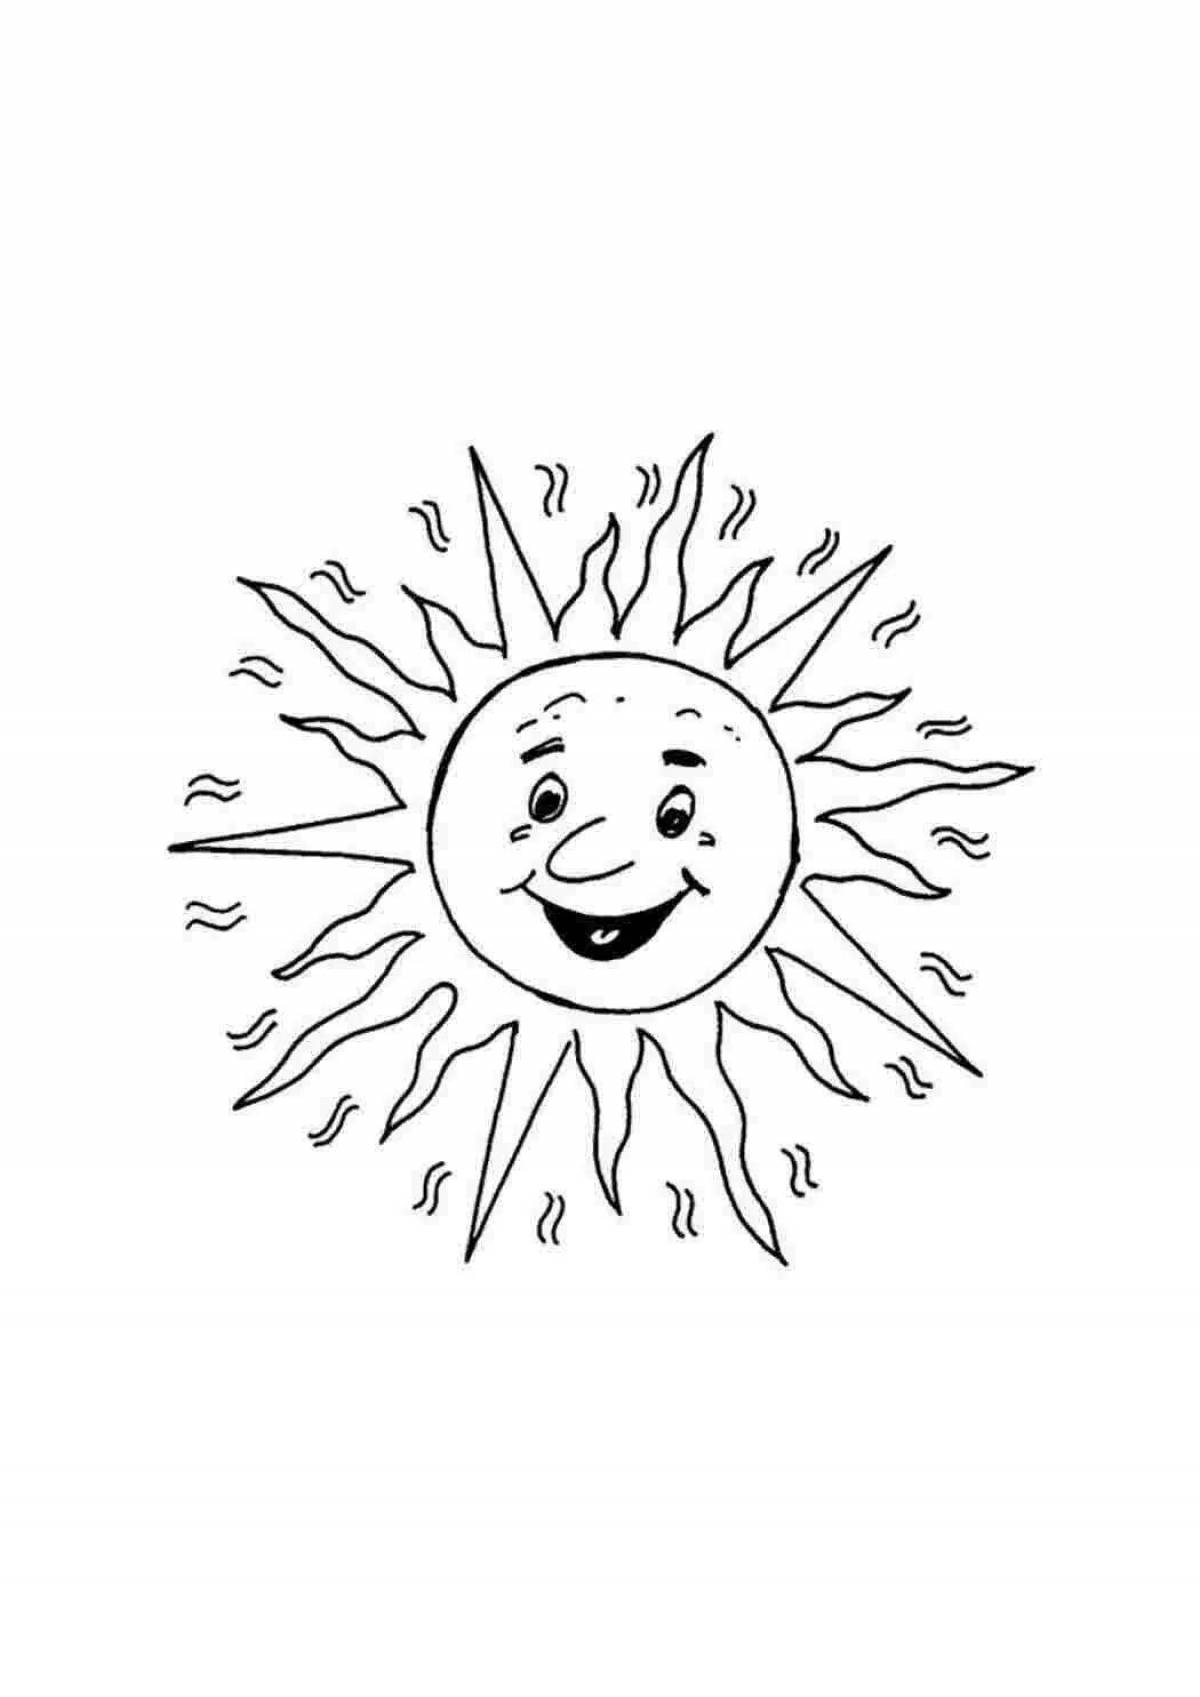 Awesome carnival sun coloring page